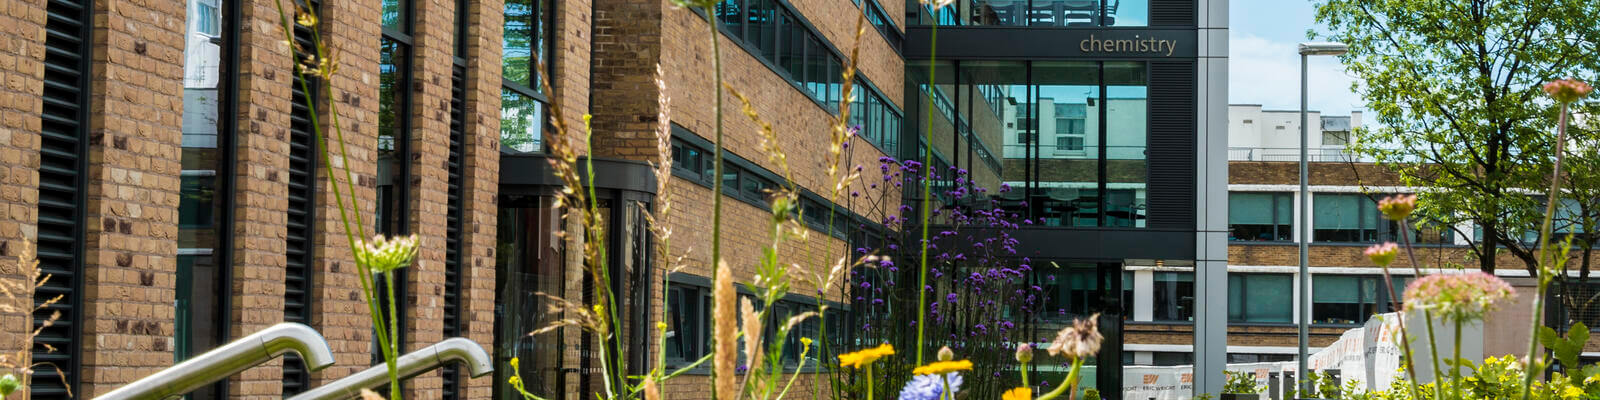 A picture of the Chemistry Building on Lancaster Bailrigg Campus and some flowers.